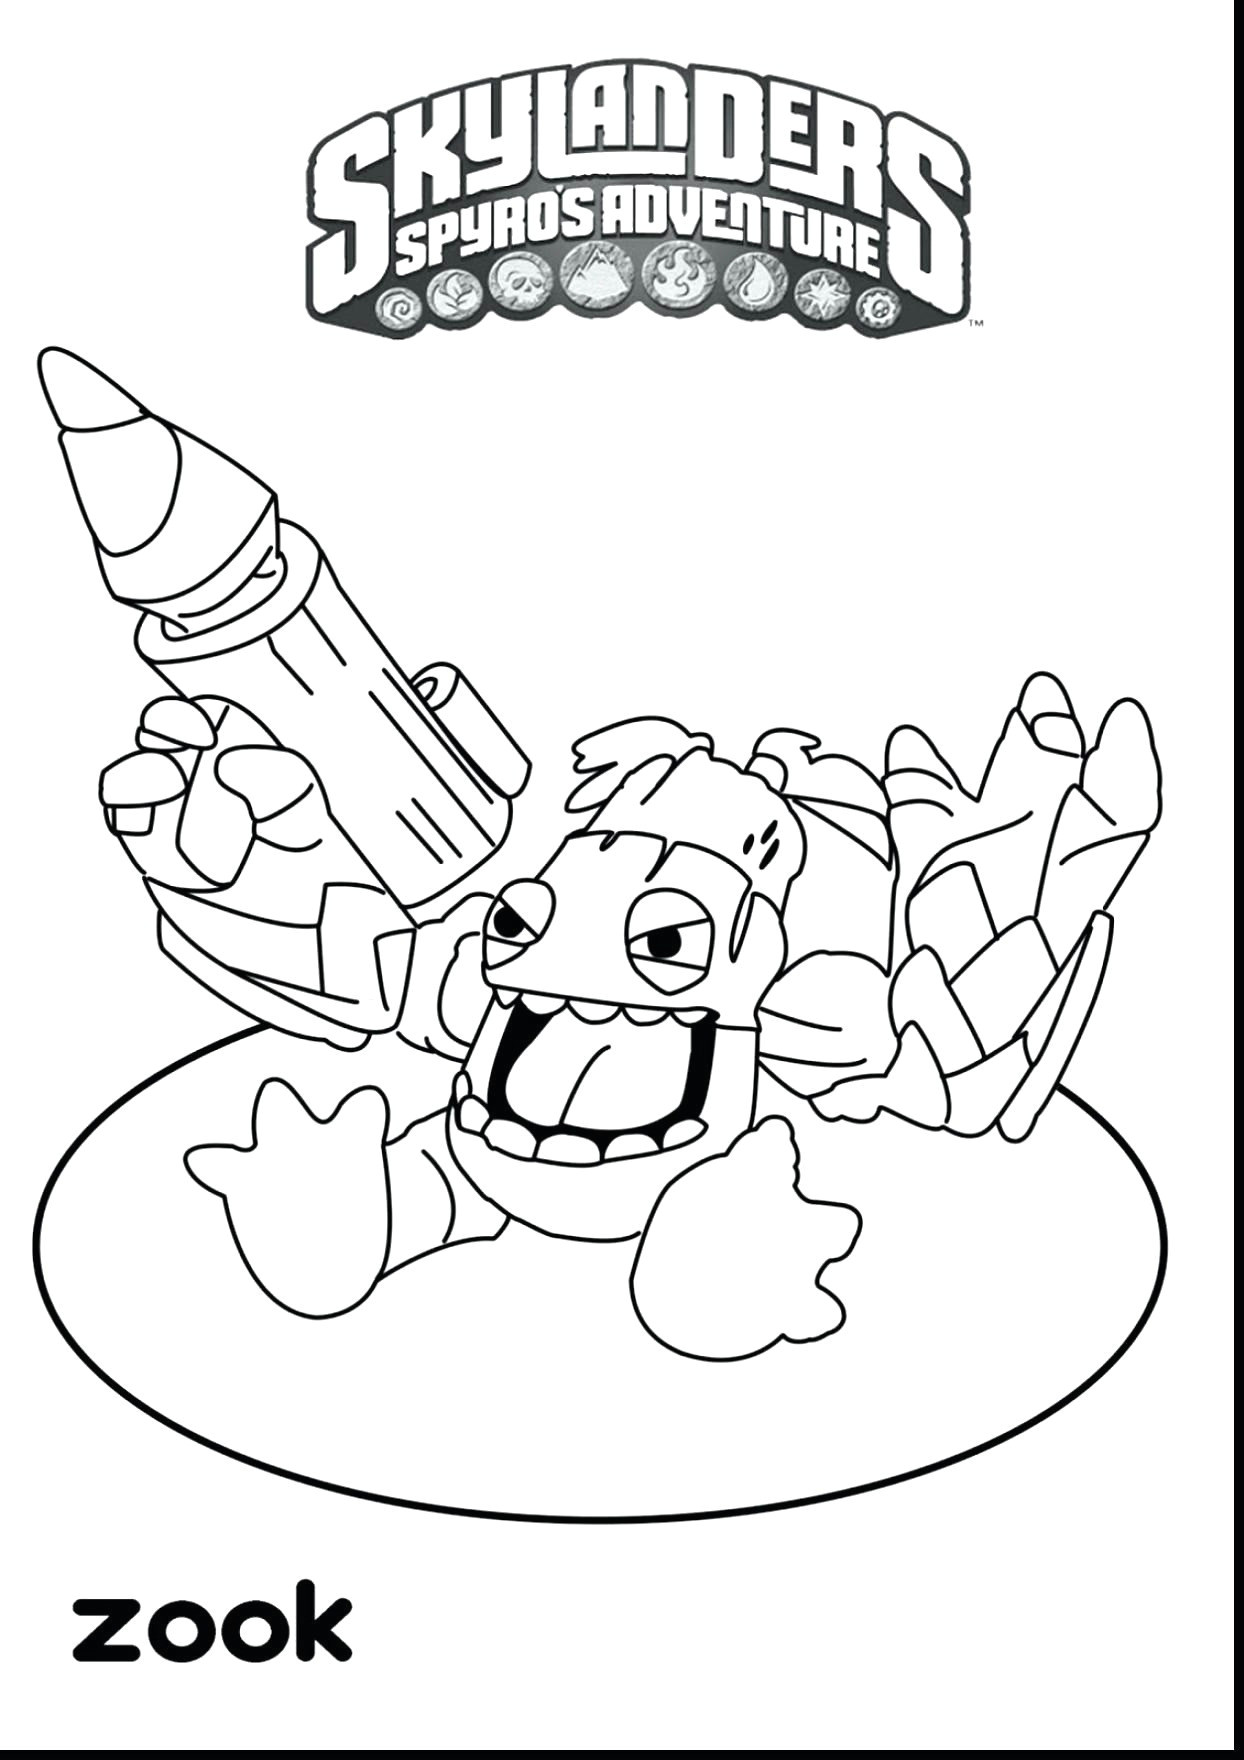 Drawing Cartoons Color Www Colouring Pages Brilliant Easy to Draw Instruments Home Coloring